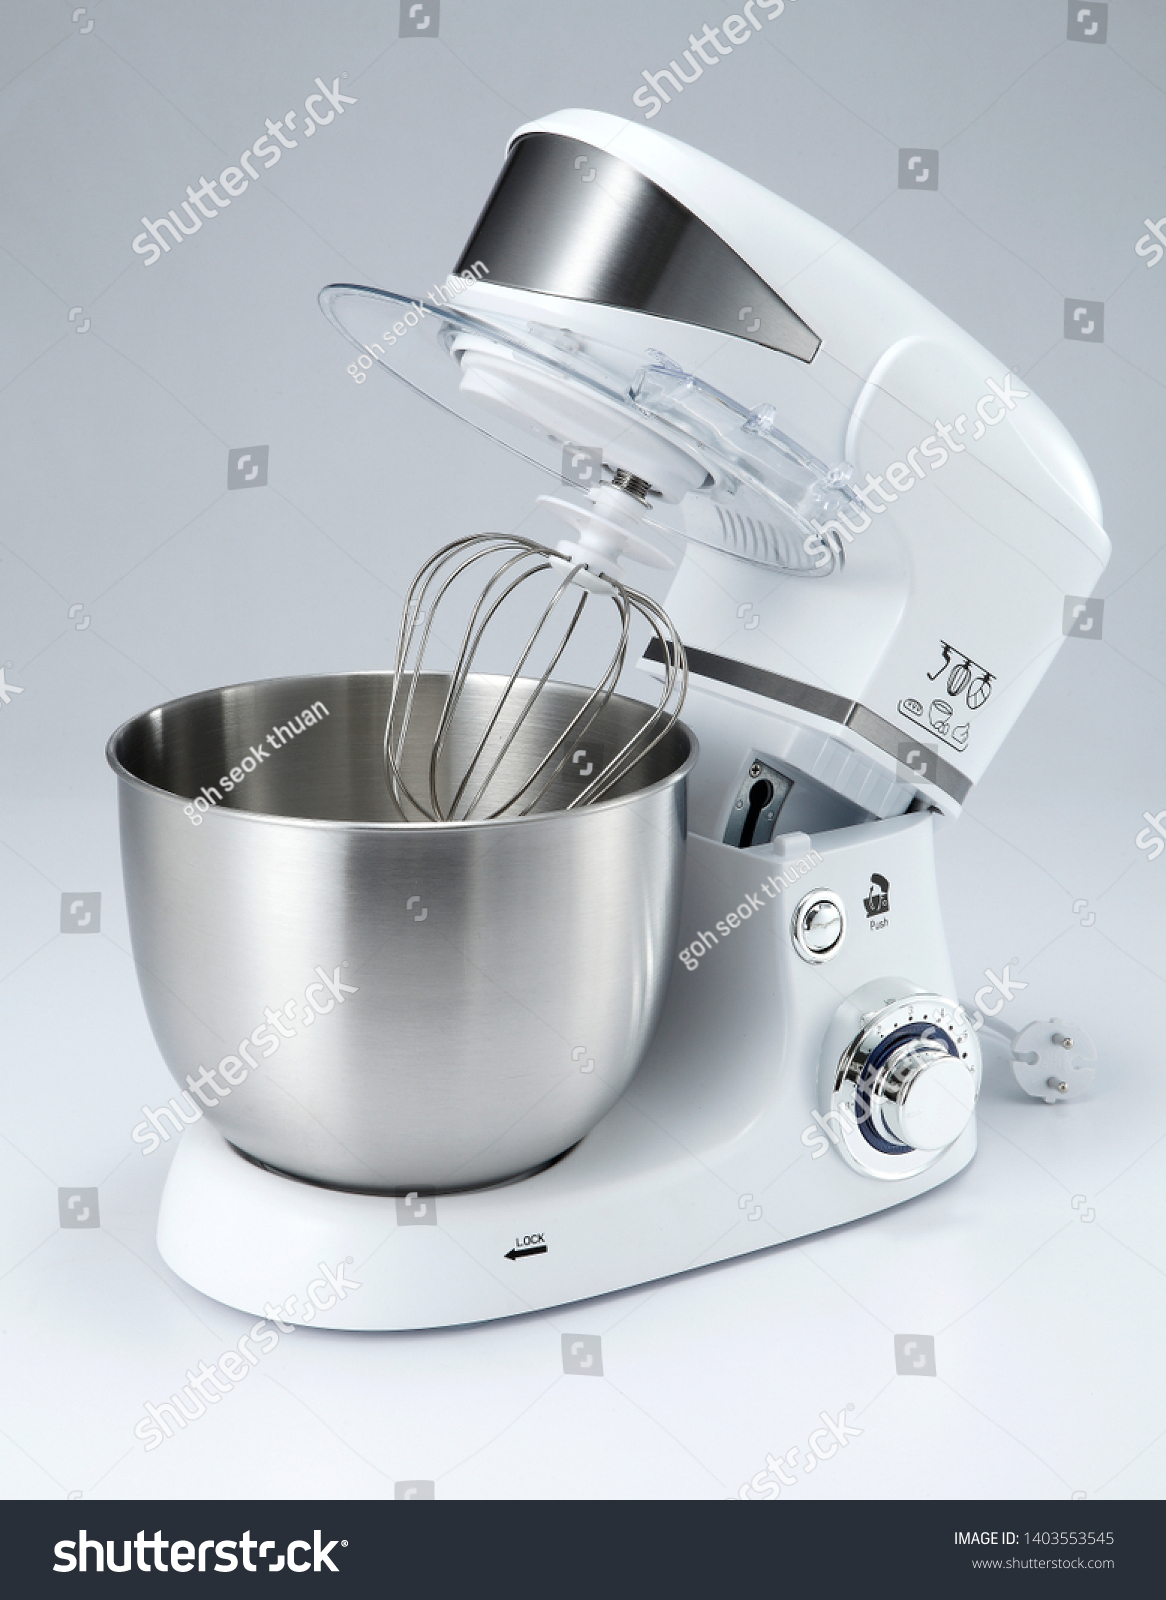 A mixer, hand mixer or stand mixer, is a kitchen device that uses a gear-driven mechanism to rotate a set of "beaters" in a bowl containing the food or liquids to be prepared by mixing them. #1403553545